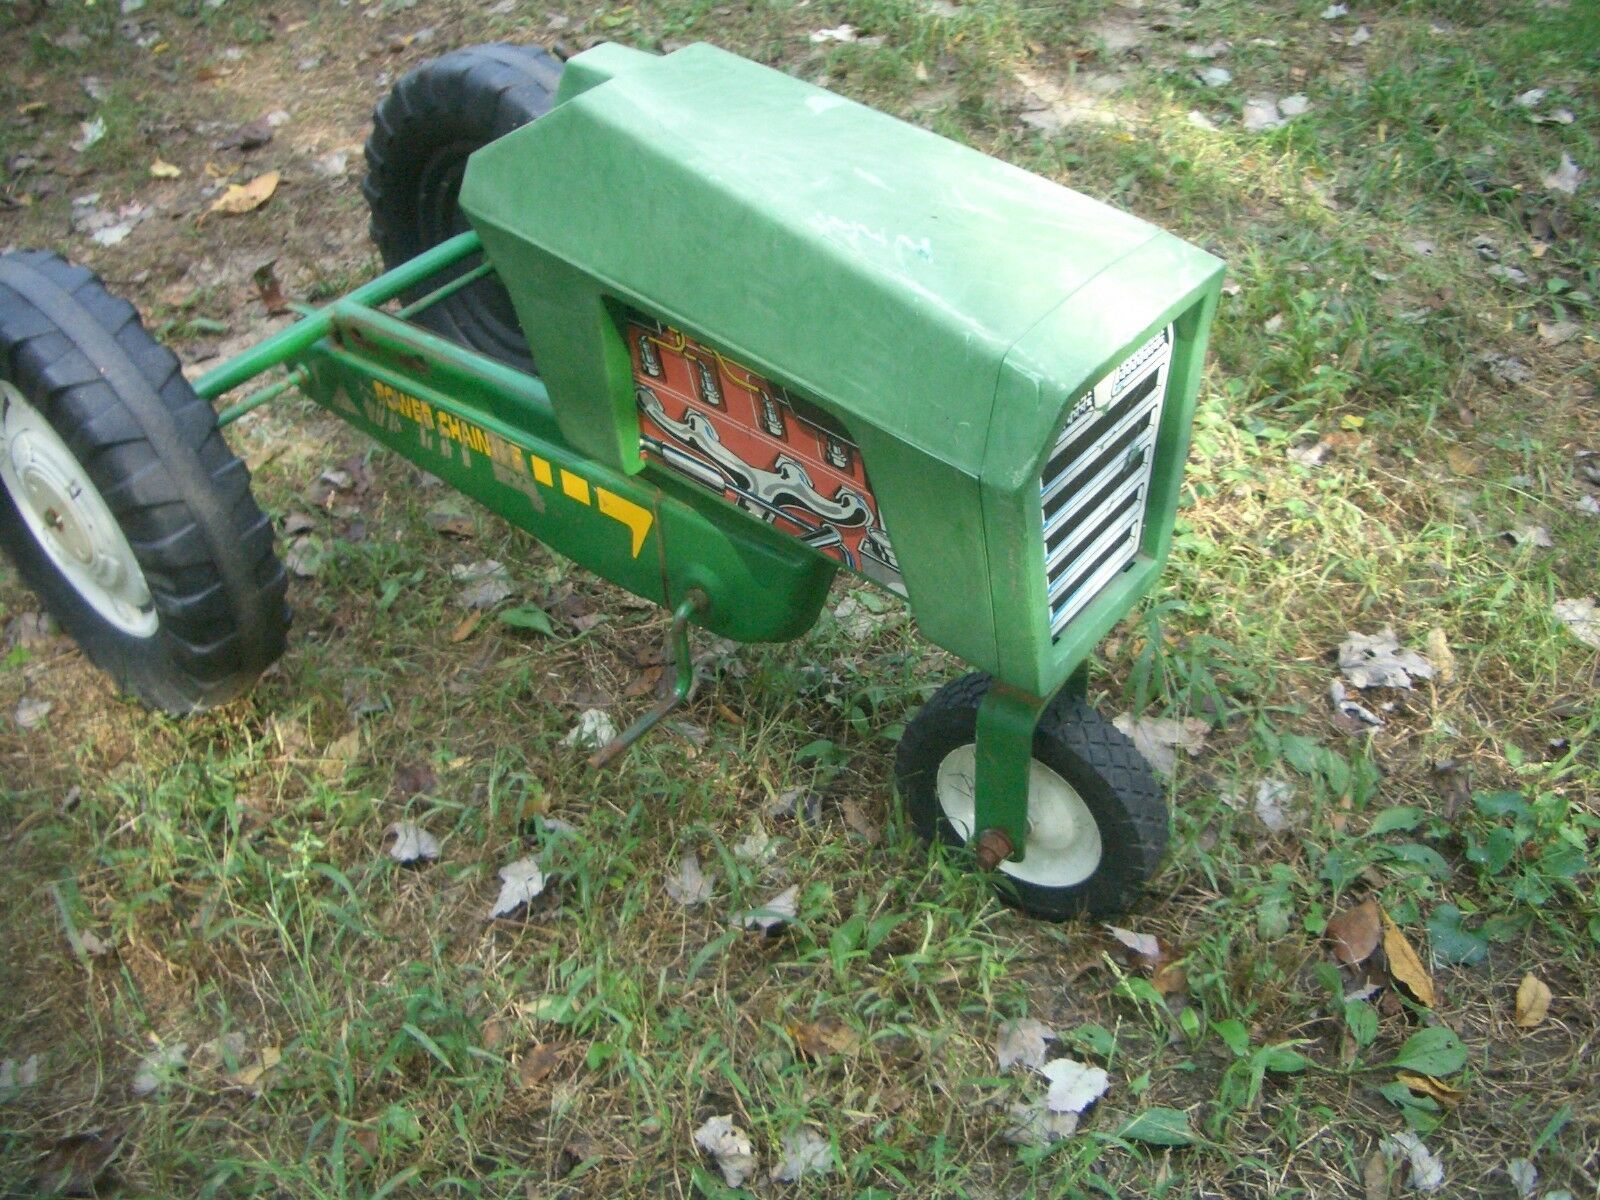 Full Size (42"x24"x24") Scarce Power Chain Drive Pedal Tractor, Nice, Lqqk, Read